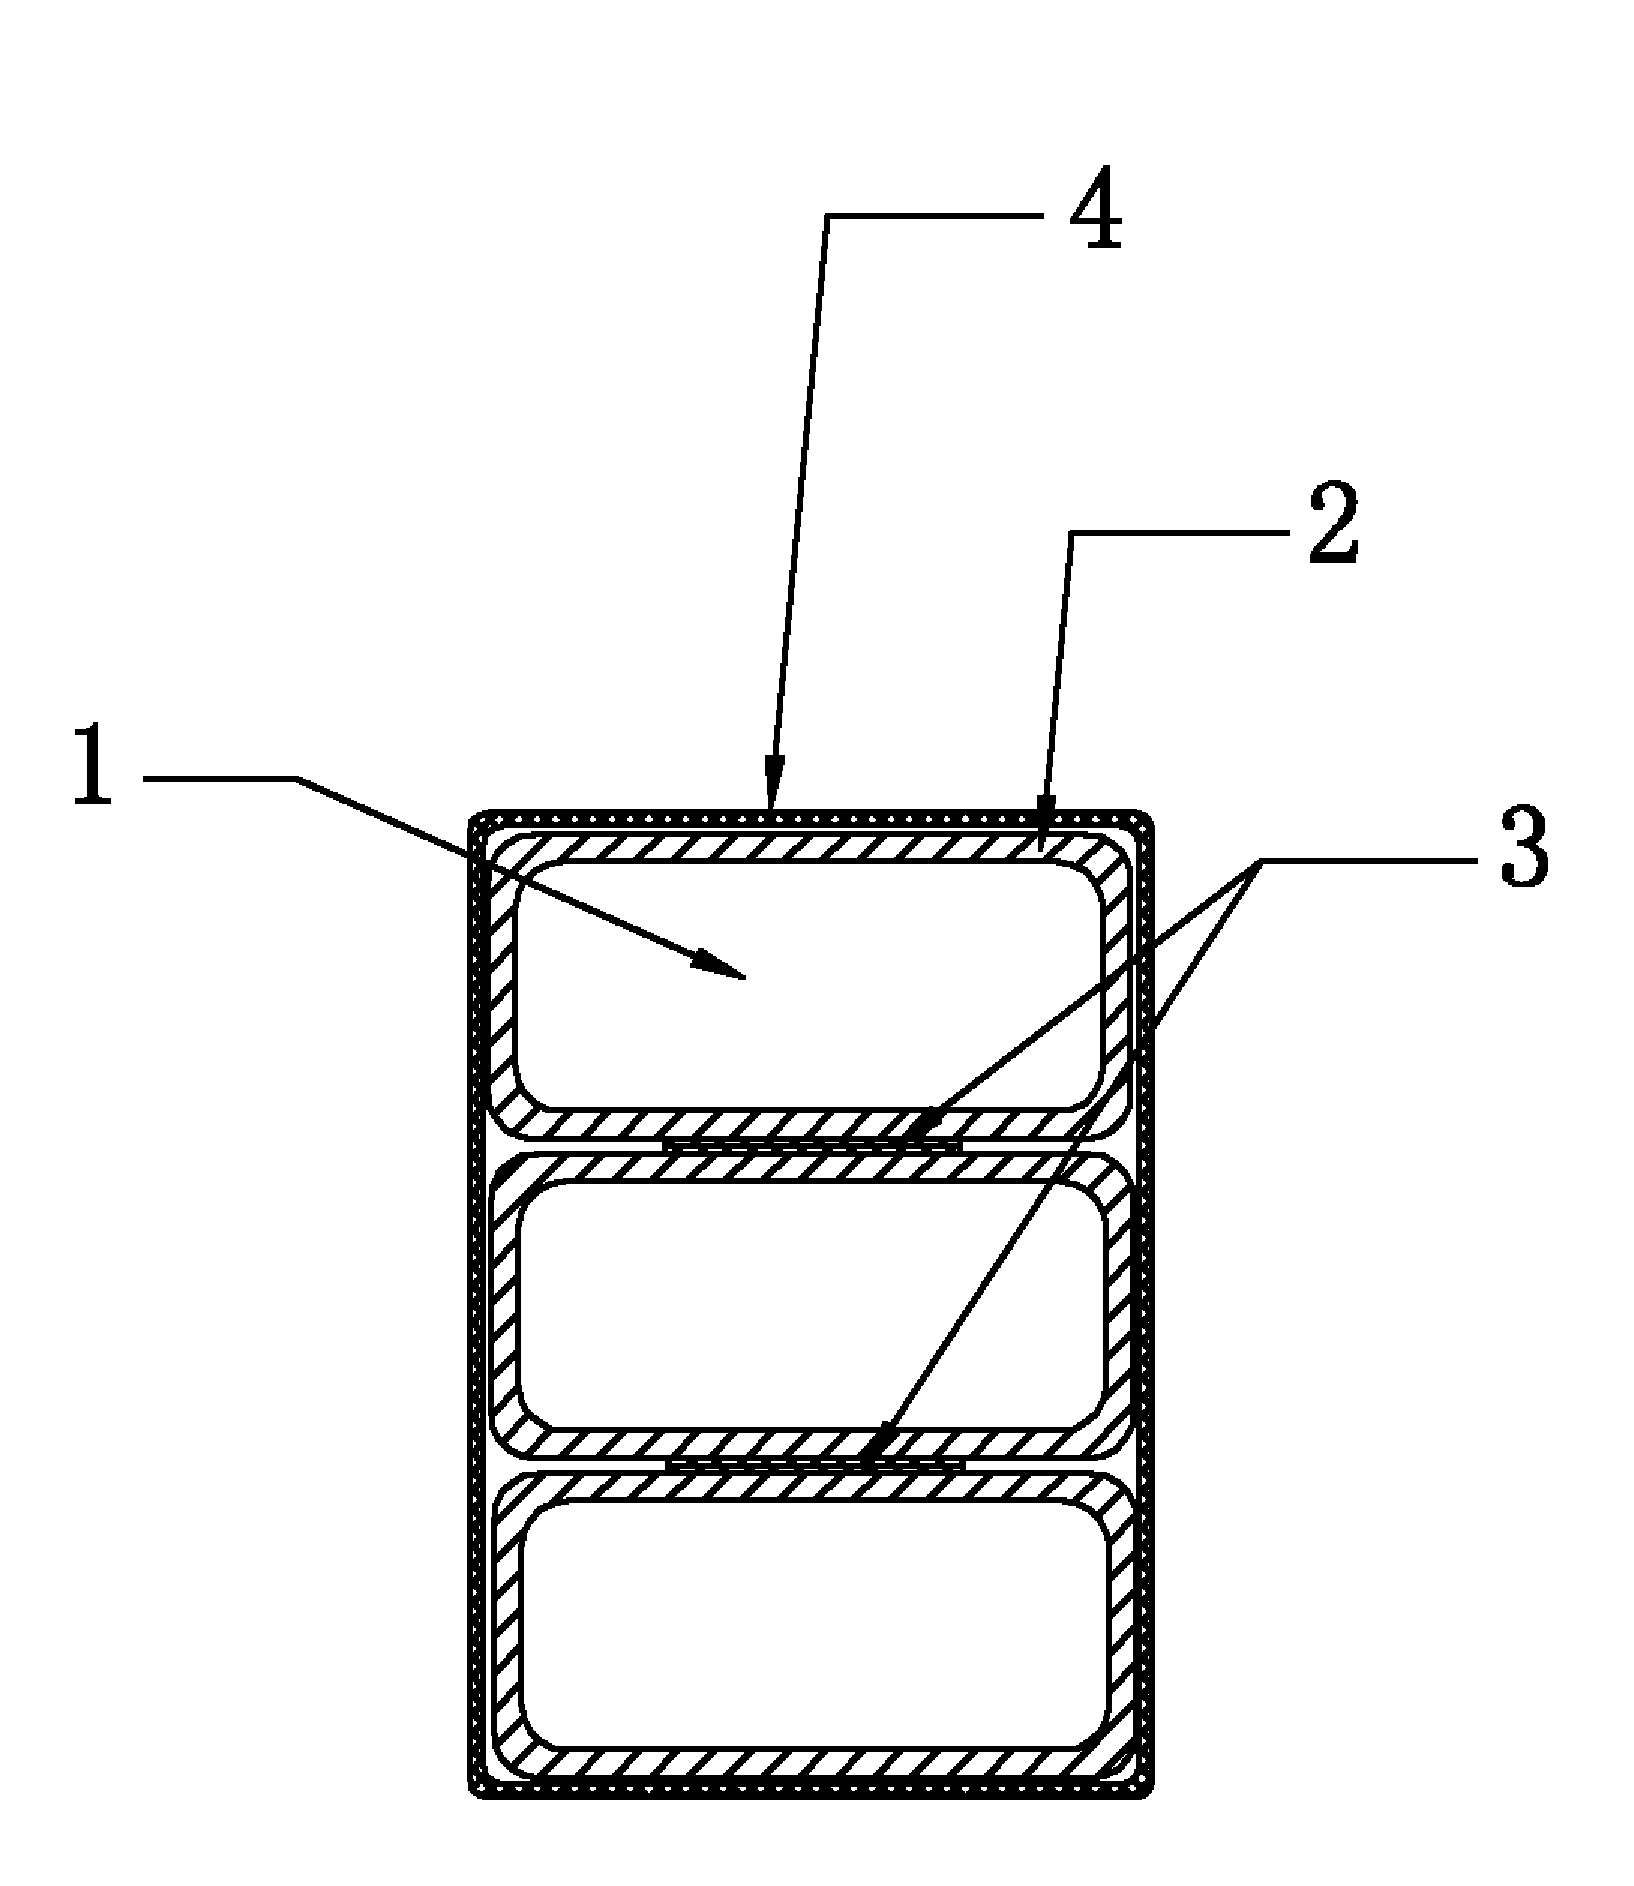 Improved paper insulated self-adhesive enameled composite conductor